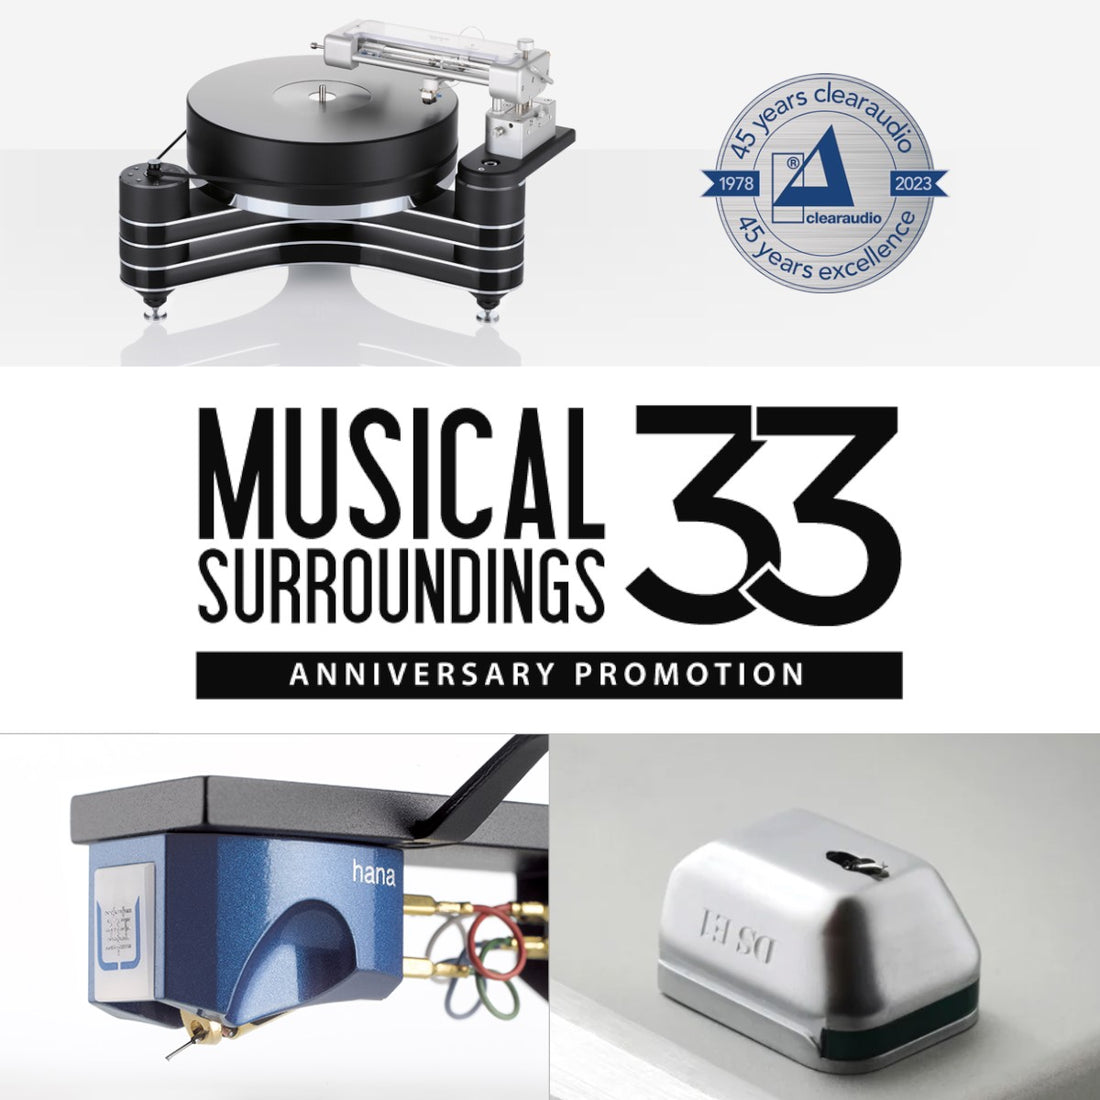 Musical Surroundings Anniversary Promotions